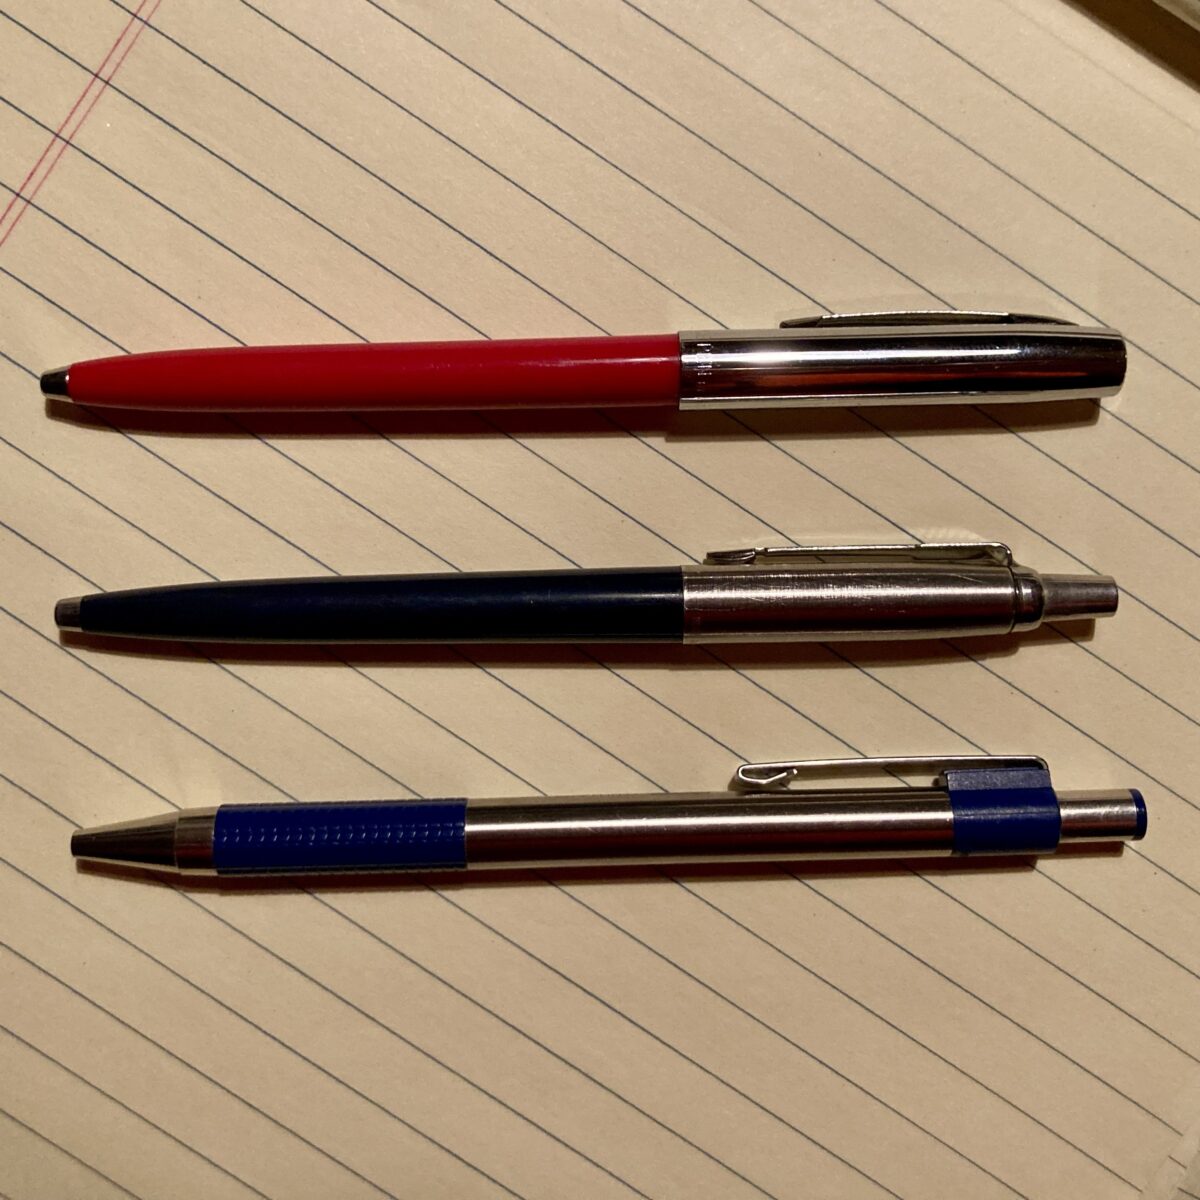 Thoughts on ballpoint pens